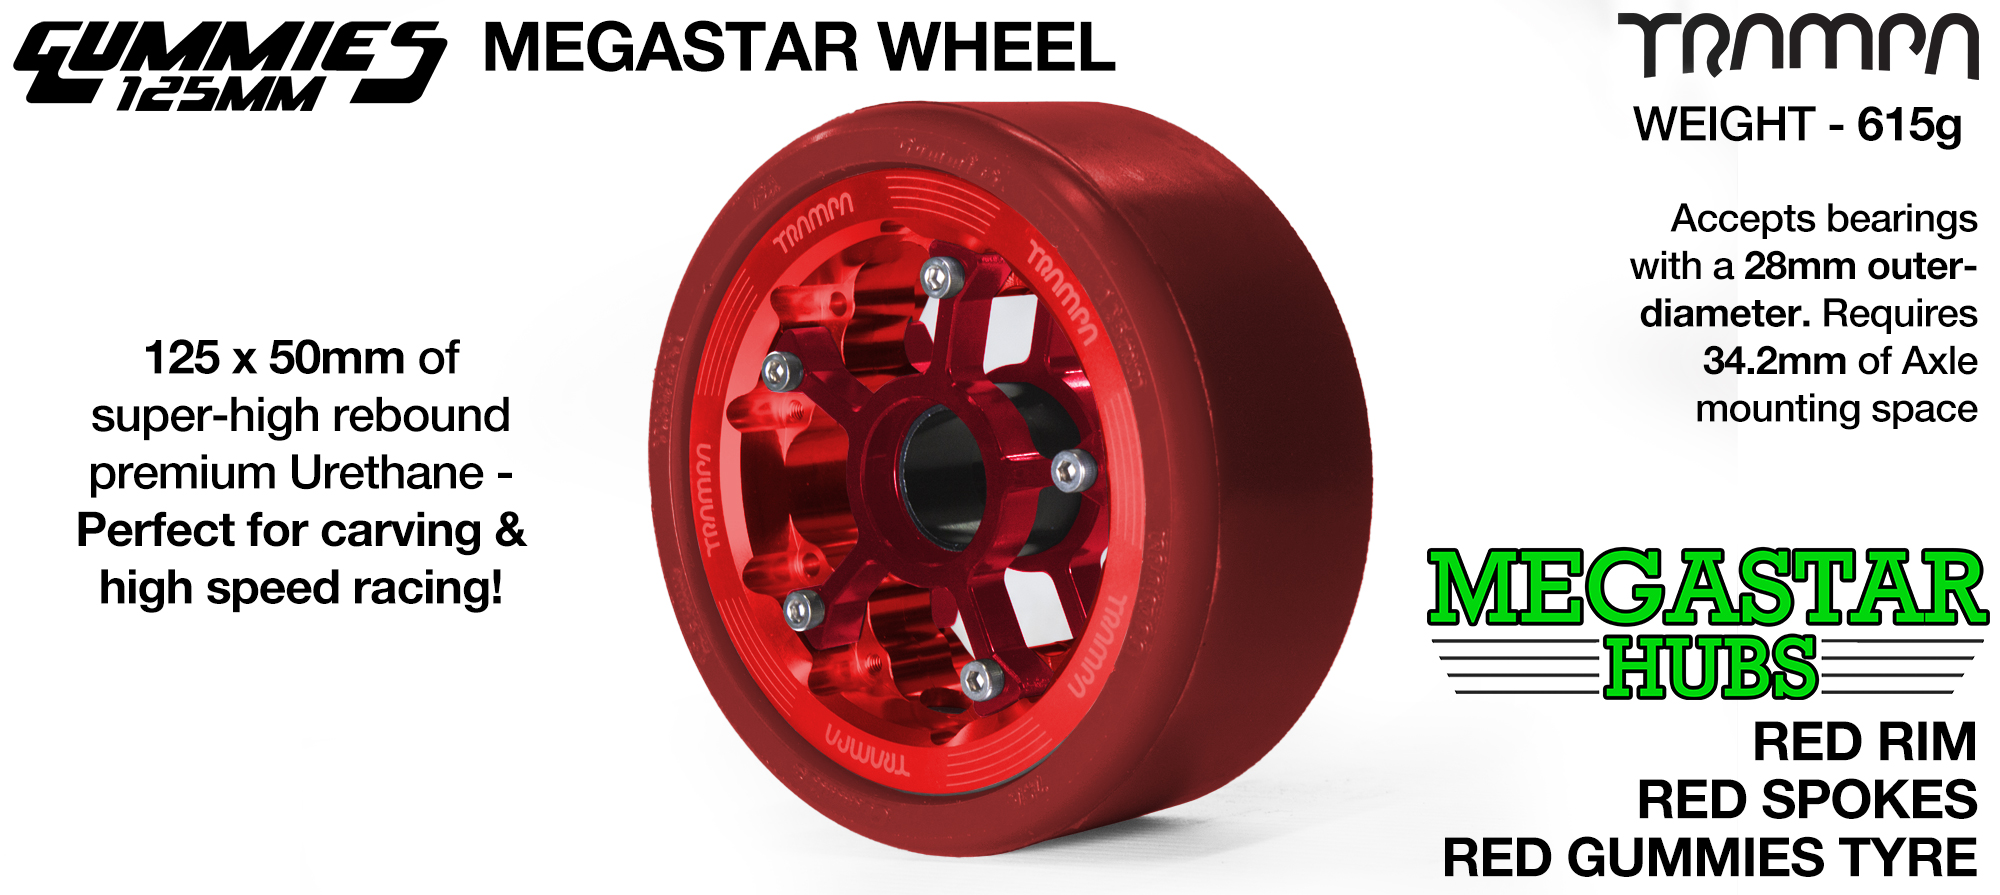 RED CENTER-SET MEGASTAR 8 Rim with RED Spokes & RED Gummies - The Ulrimate Longboard Wheel